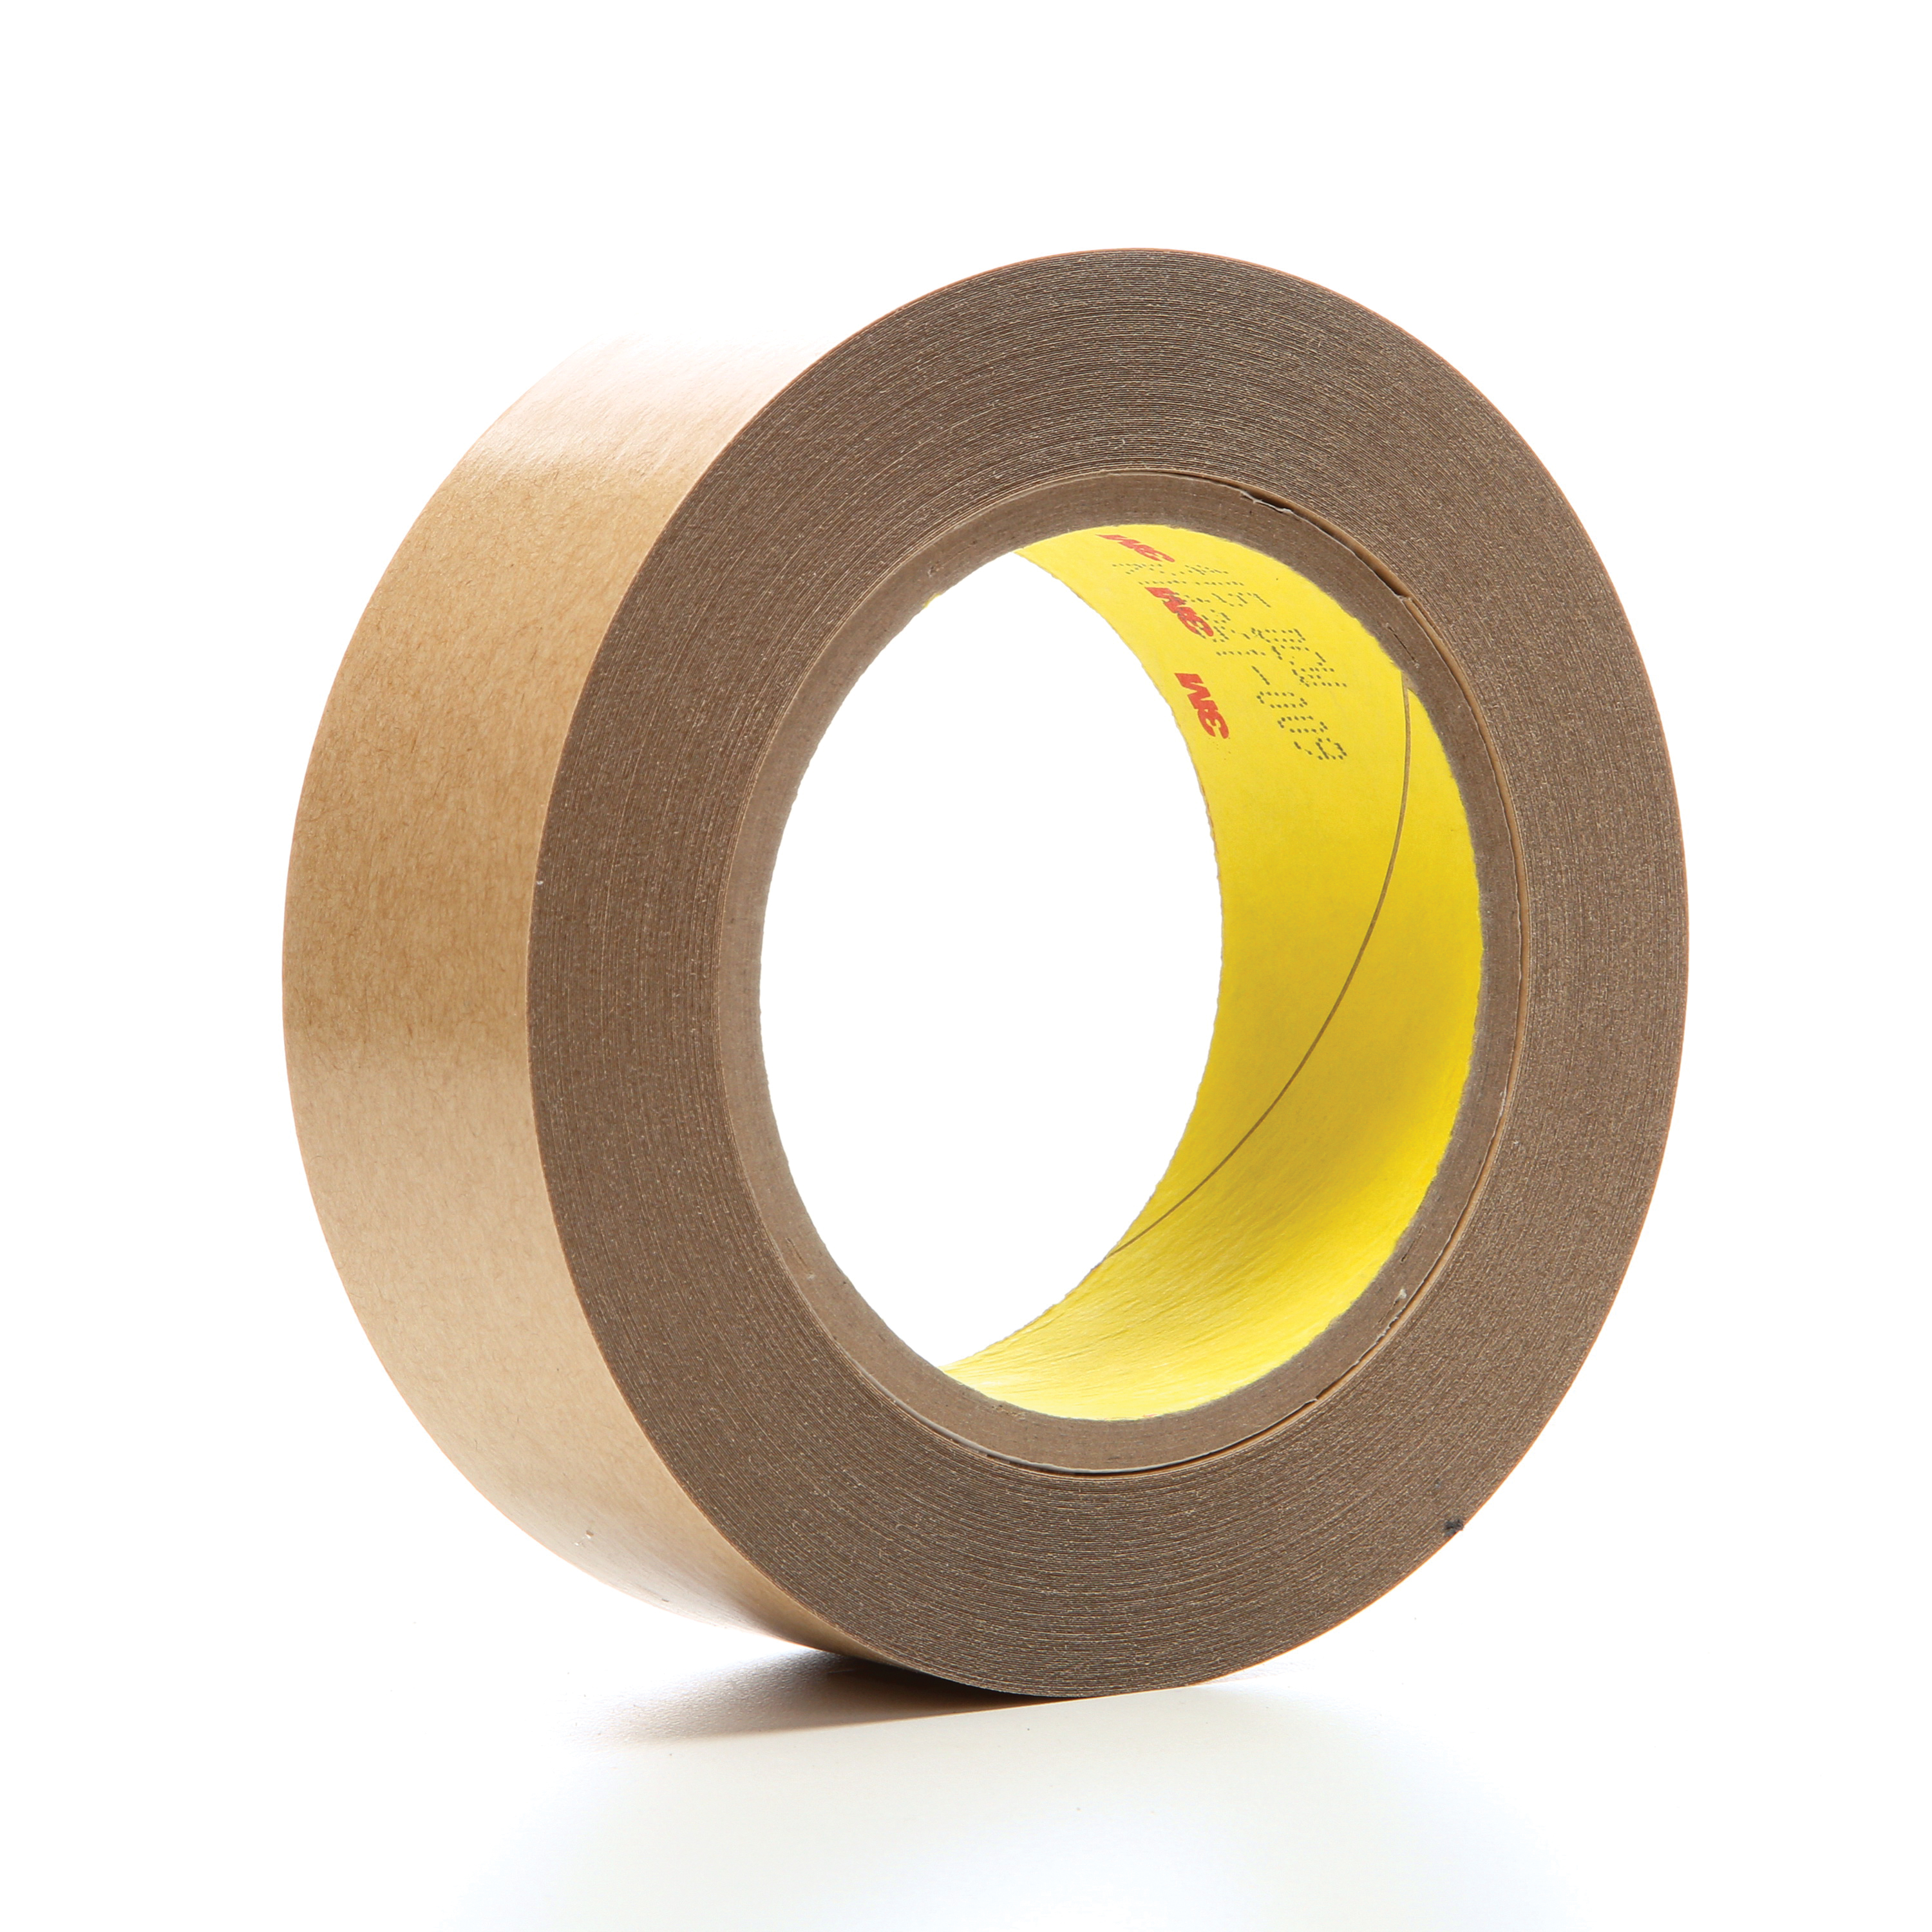 3M™ 021200-03324 Non-Repulpable Double Coated Splicing Tape, 36 yd L x 1-1/2 in W, 4 mil THK, 400HT Acrylic Adhesive, Polyester Film Backing, Clear